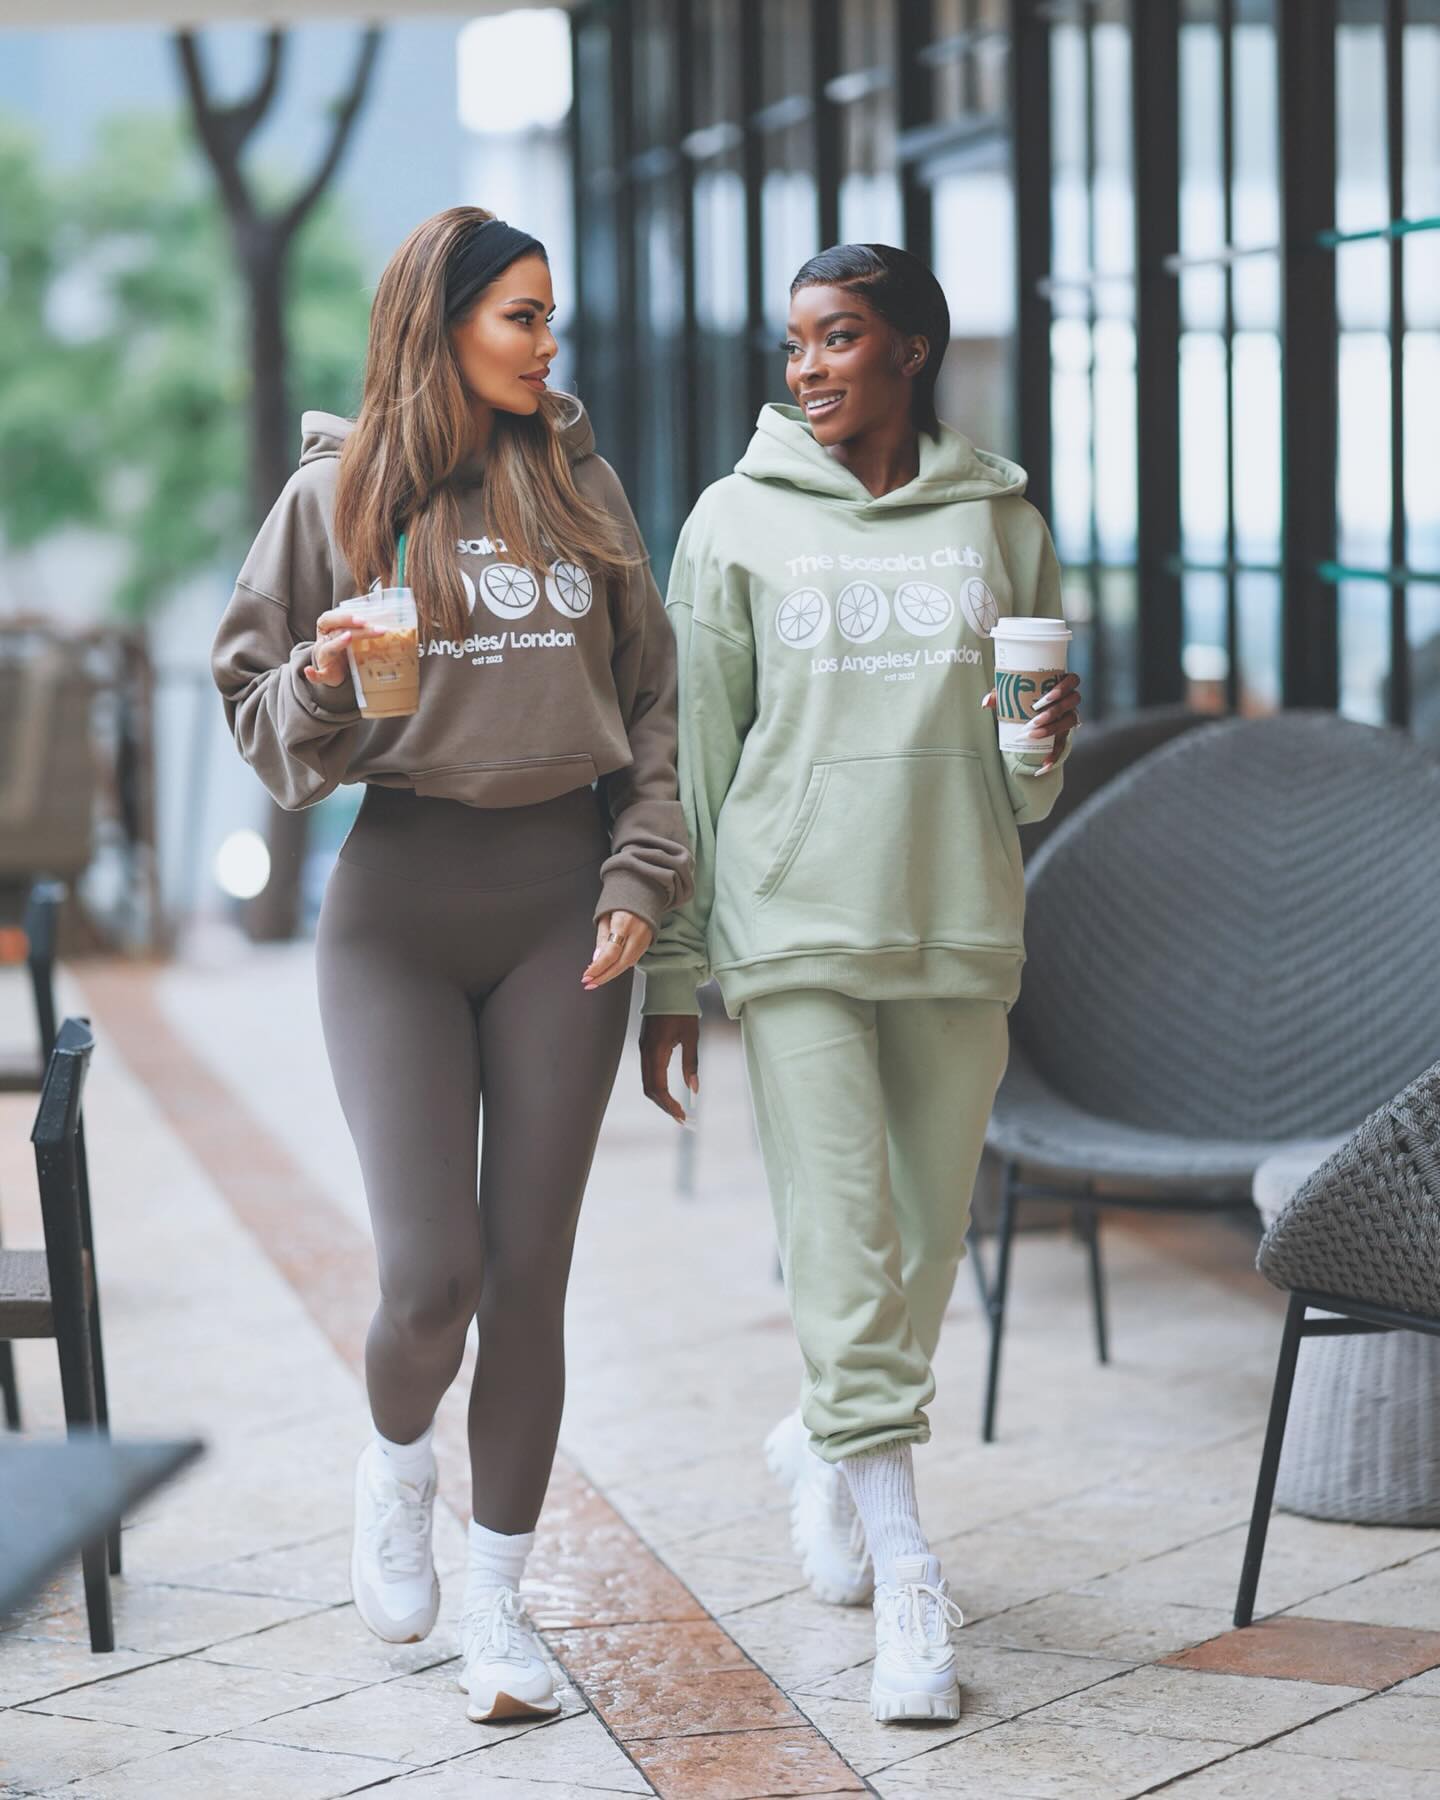 SOSALA, STARBUCKS & MUM CHATS ⭐️⭐️
.
The new collection is so comfy & cute 🥰 
@sosala DROP 2 is NOW LIVE and ready for you to SHOP! 
#AD photo credit - @bobby_pap_la ✔️